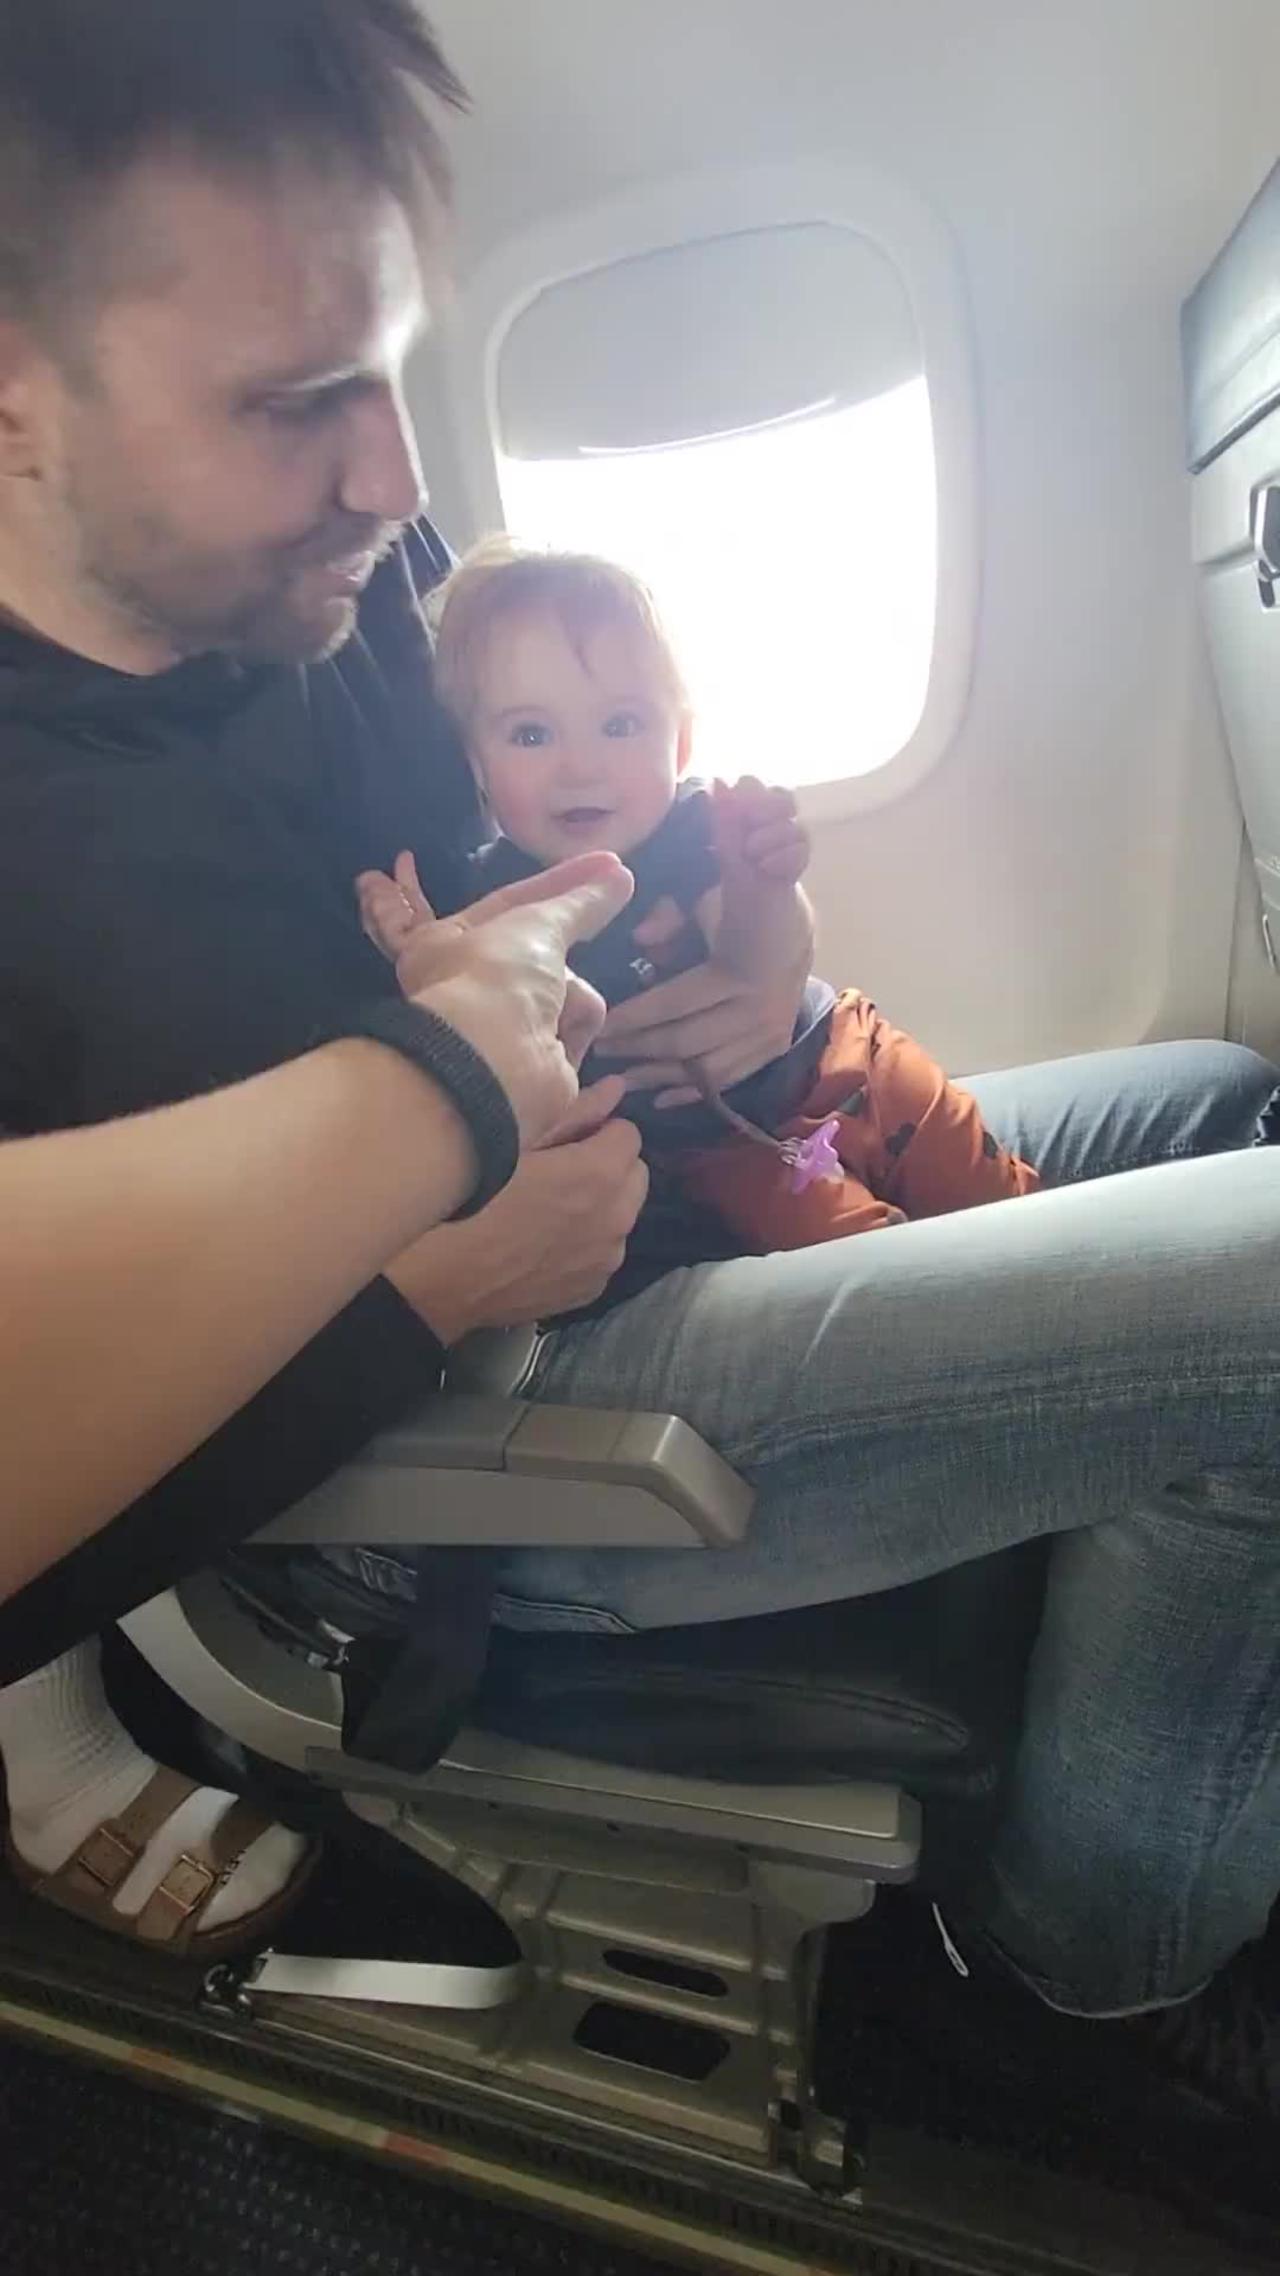 Hungry baby adorably steals dad's food